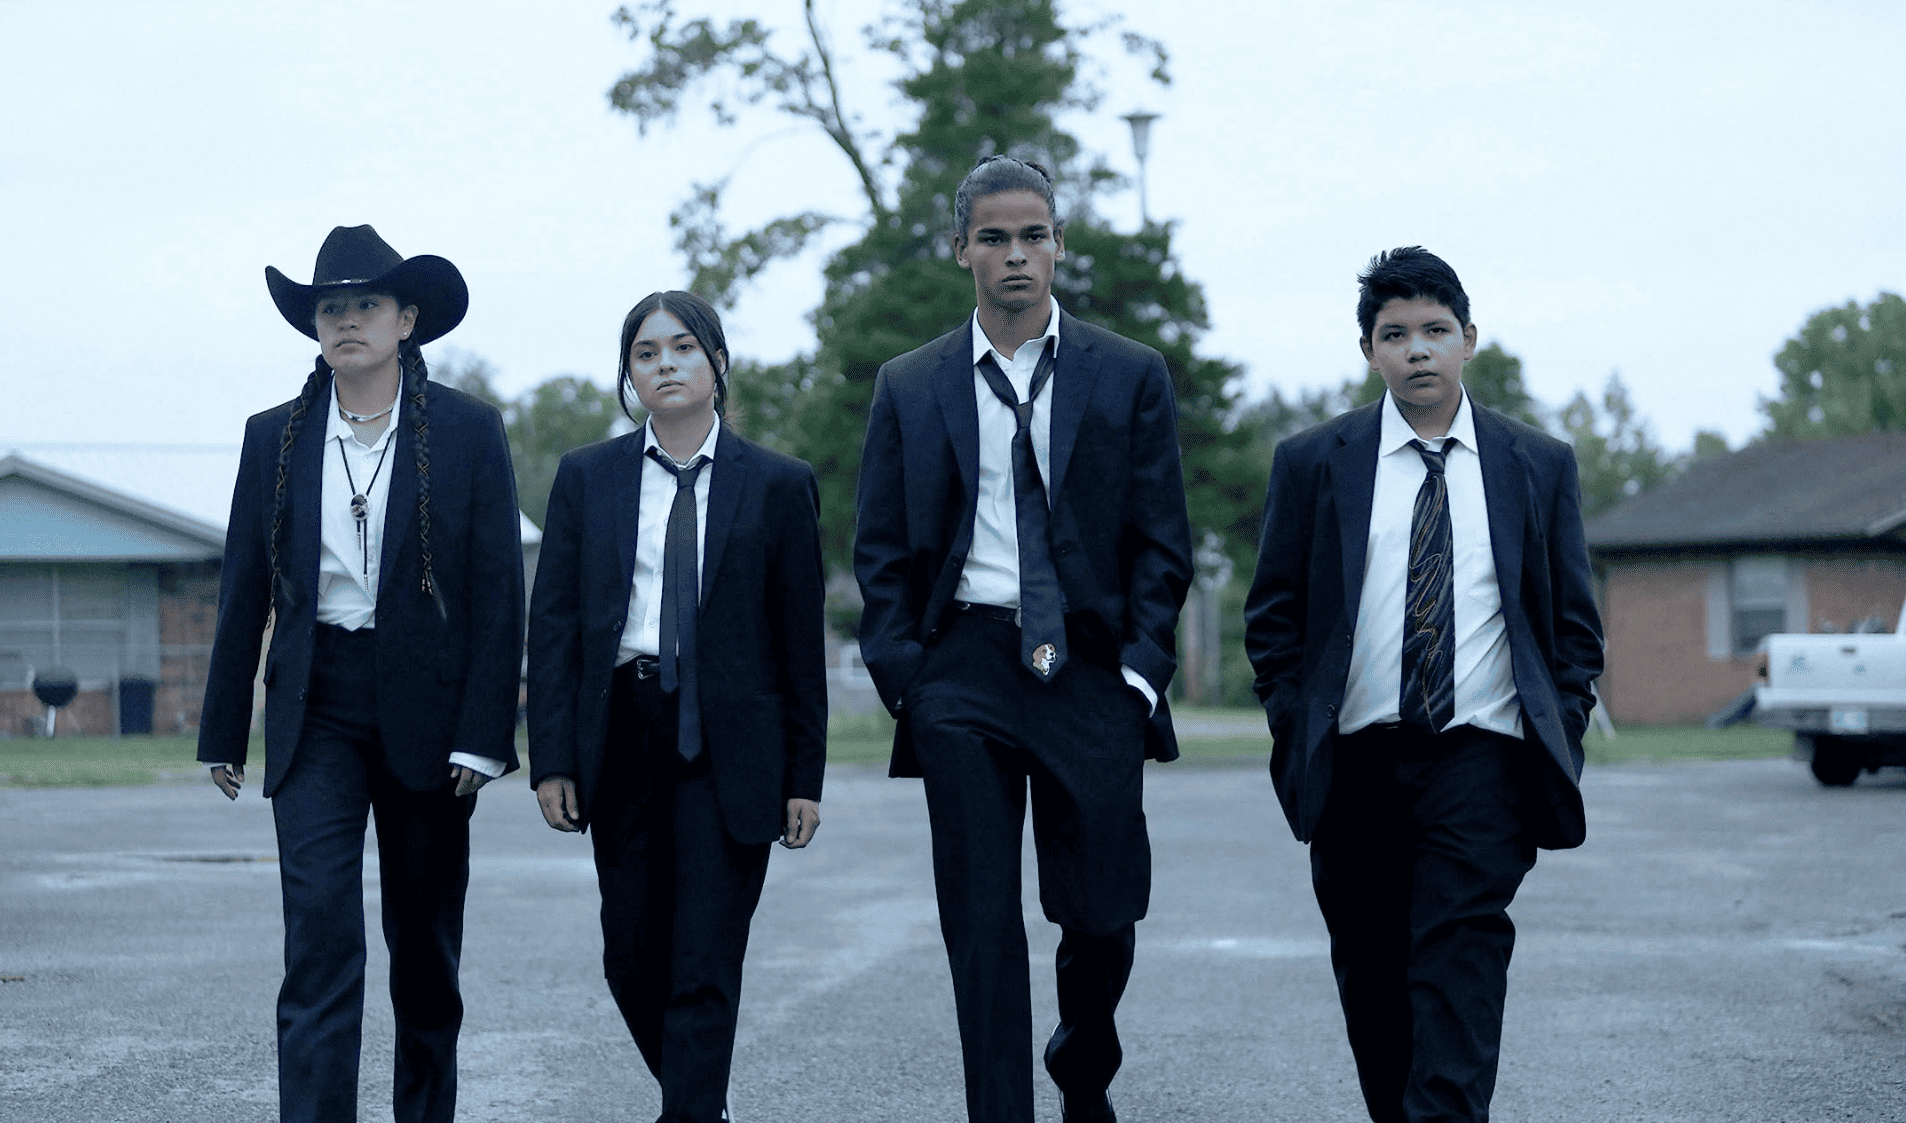 Four kids walk down the street dressed in suits in this image from FXP